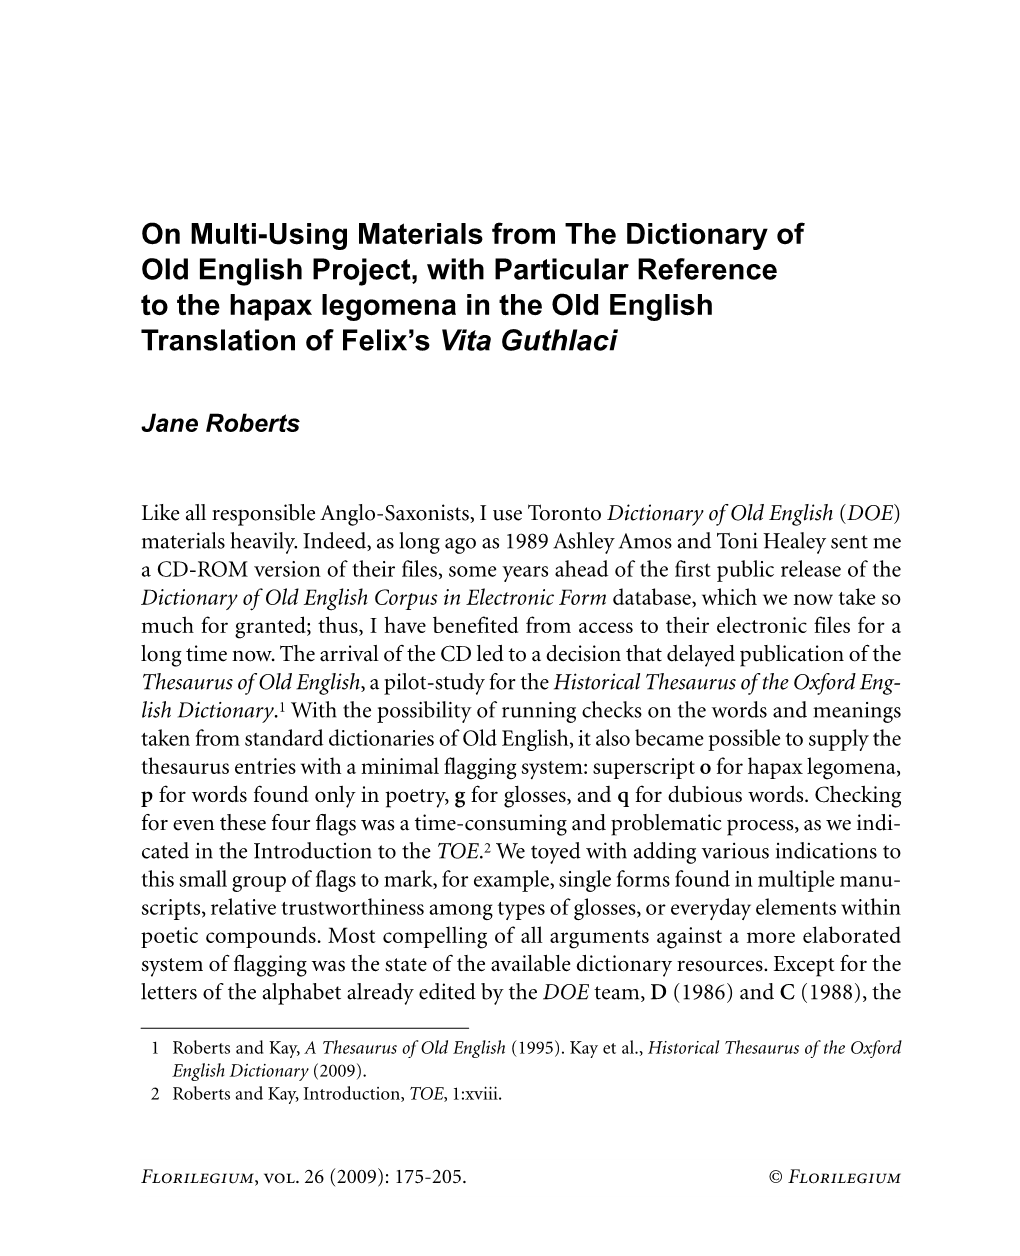 On Multi-Using Materials from the Dictionary of Old English Project